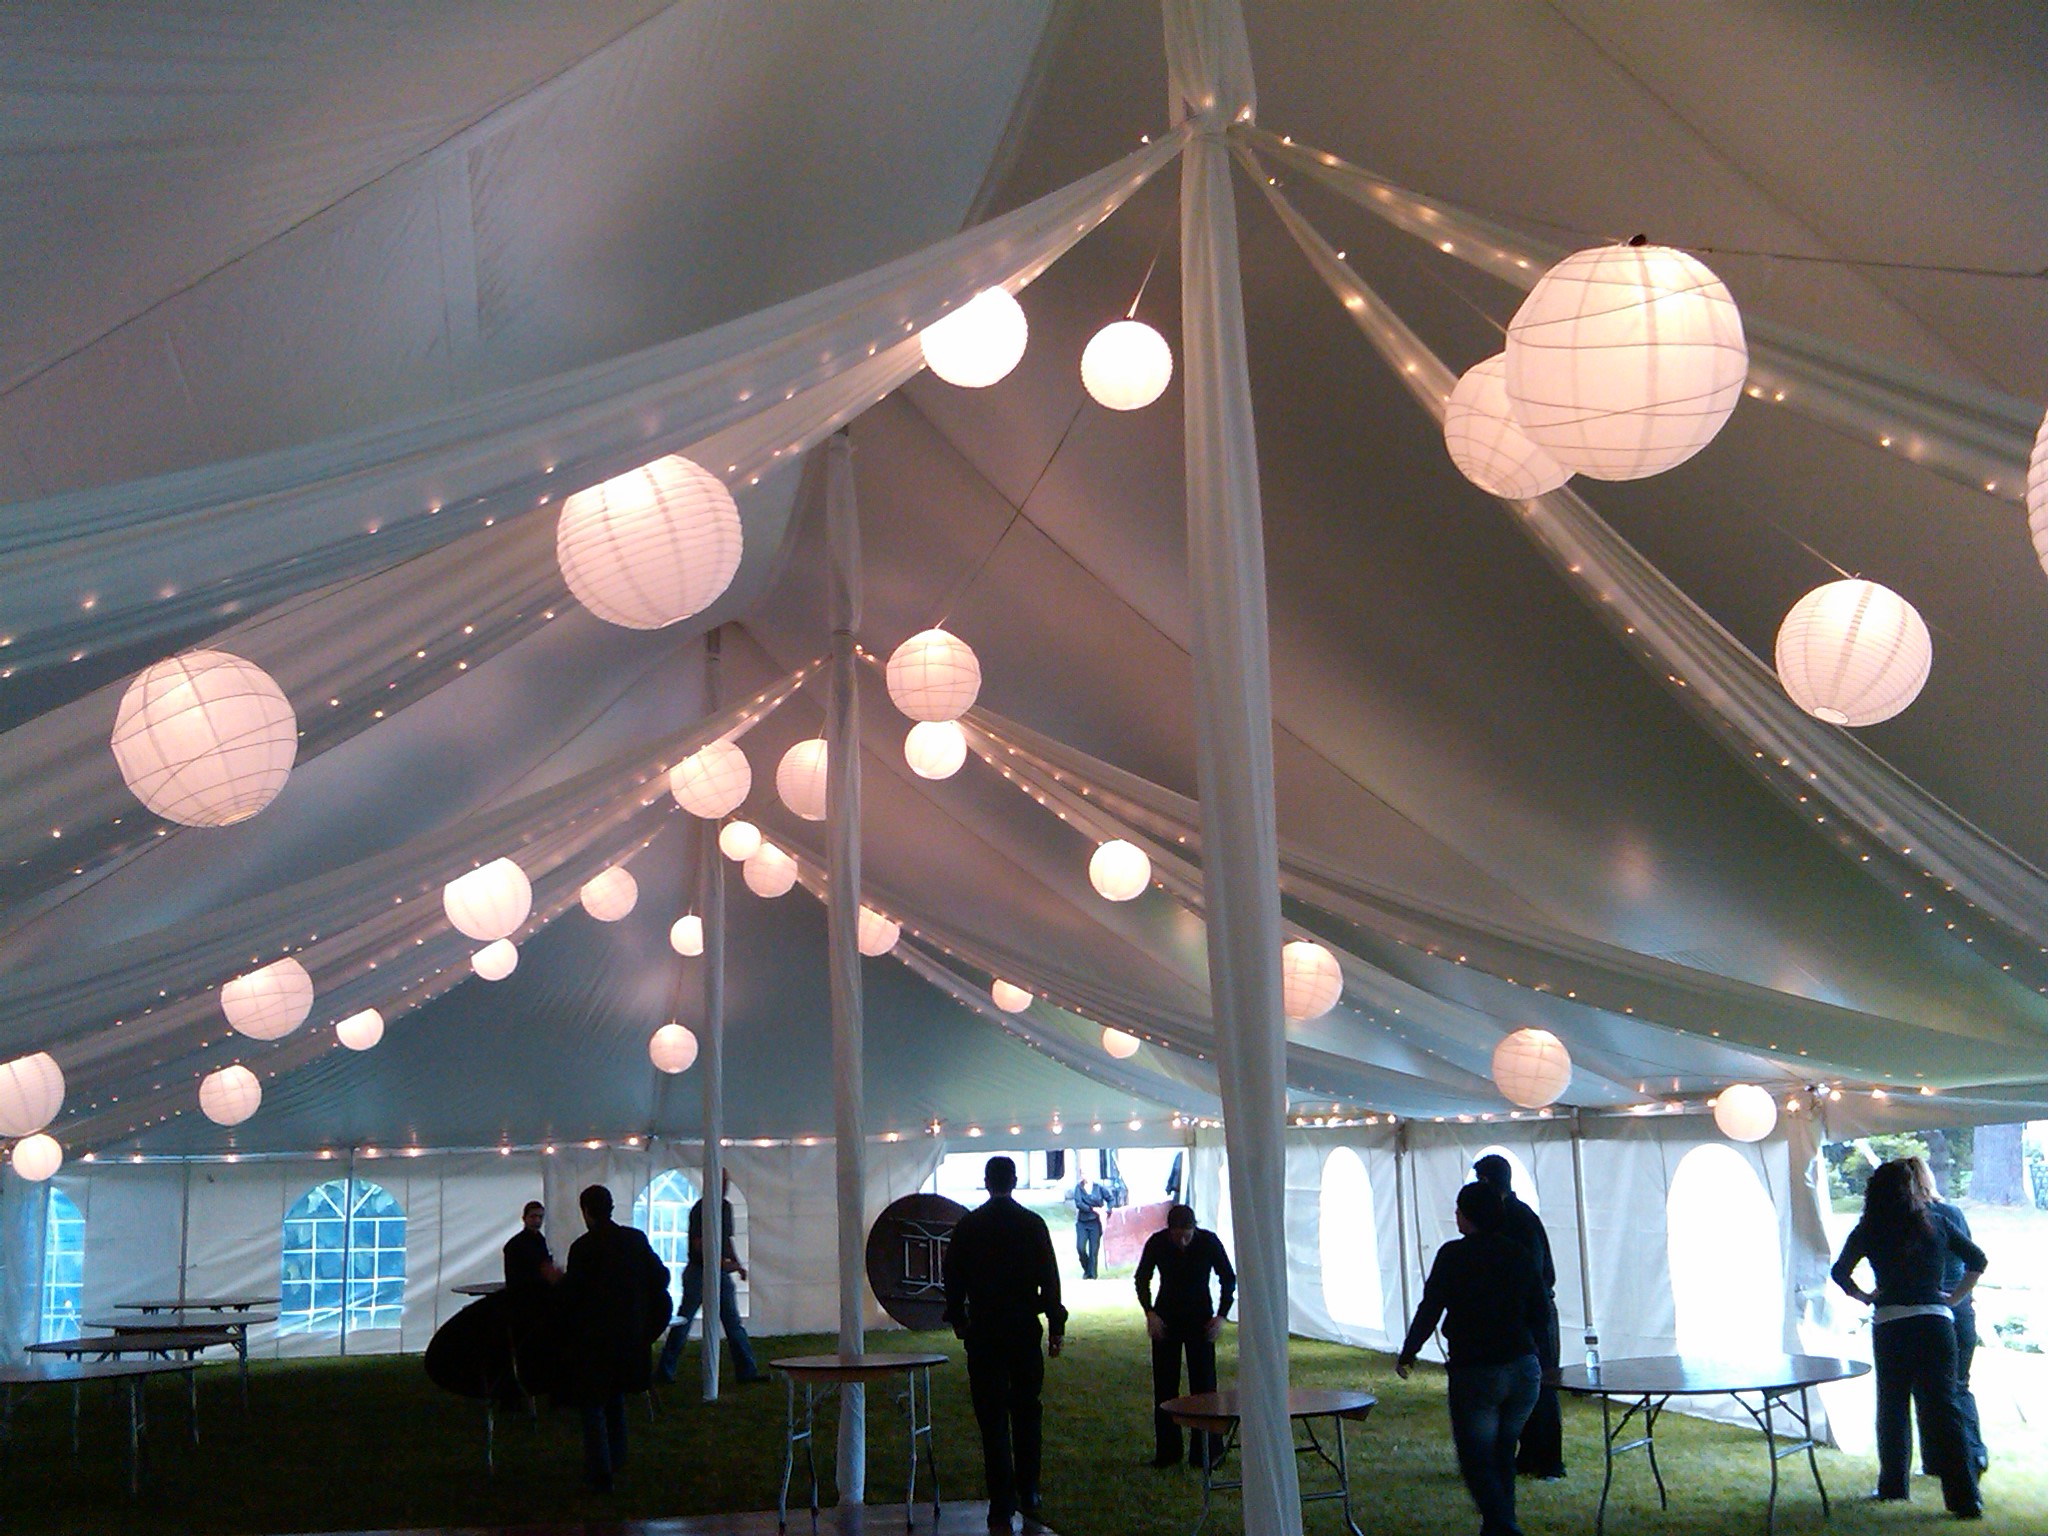 White Paper Lanterns with Fabric Swags and Twinkle Lights